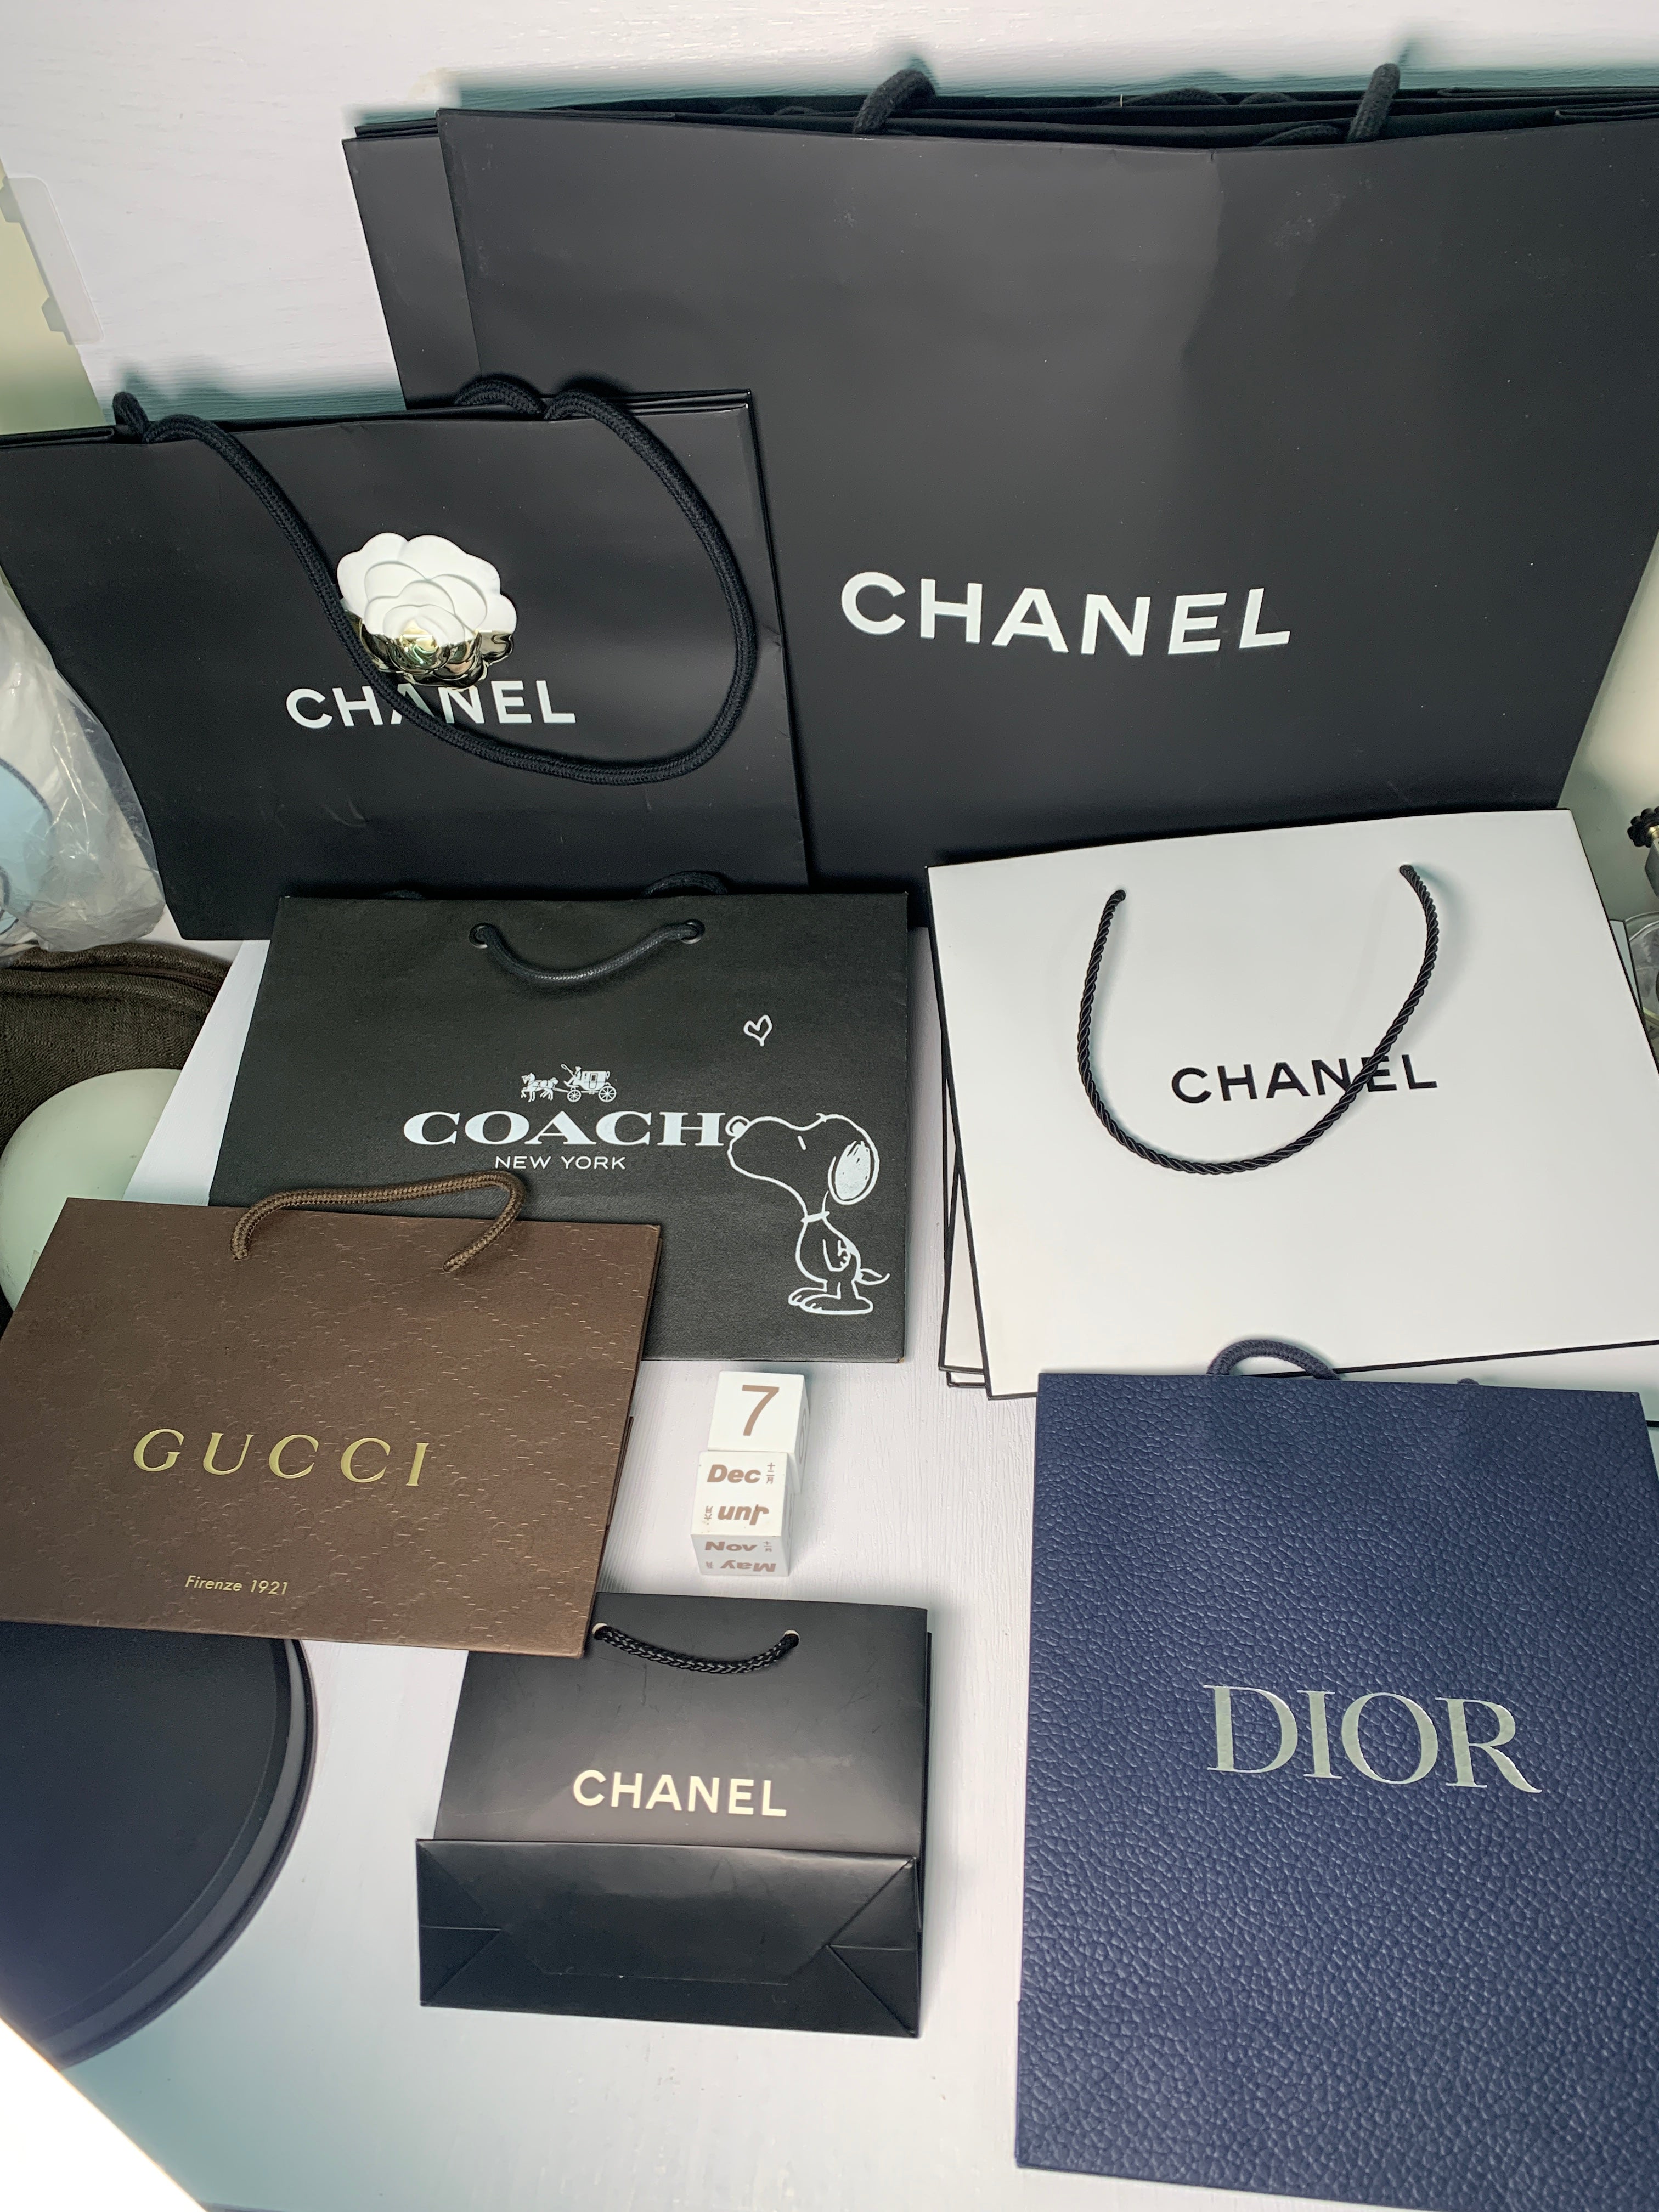 Chanel, Prada, Gucci, and Louis Vuitton Handbags Are Sold at a